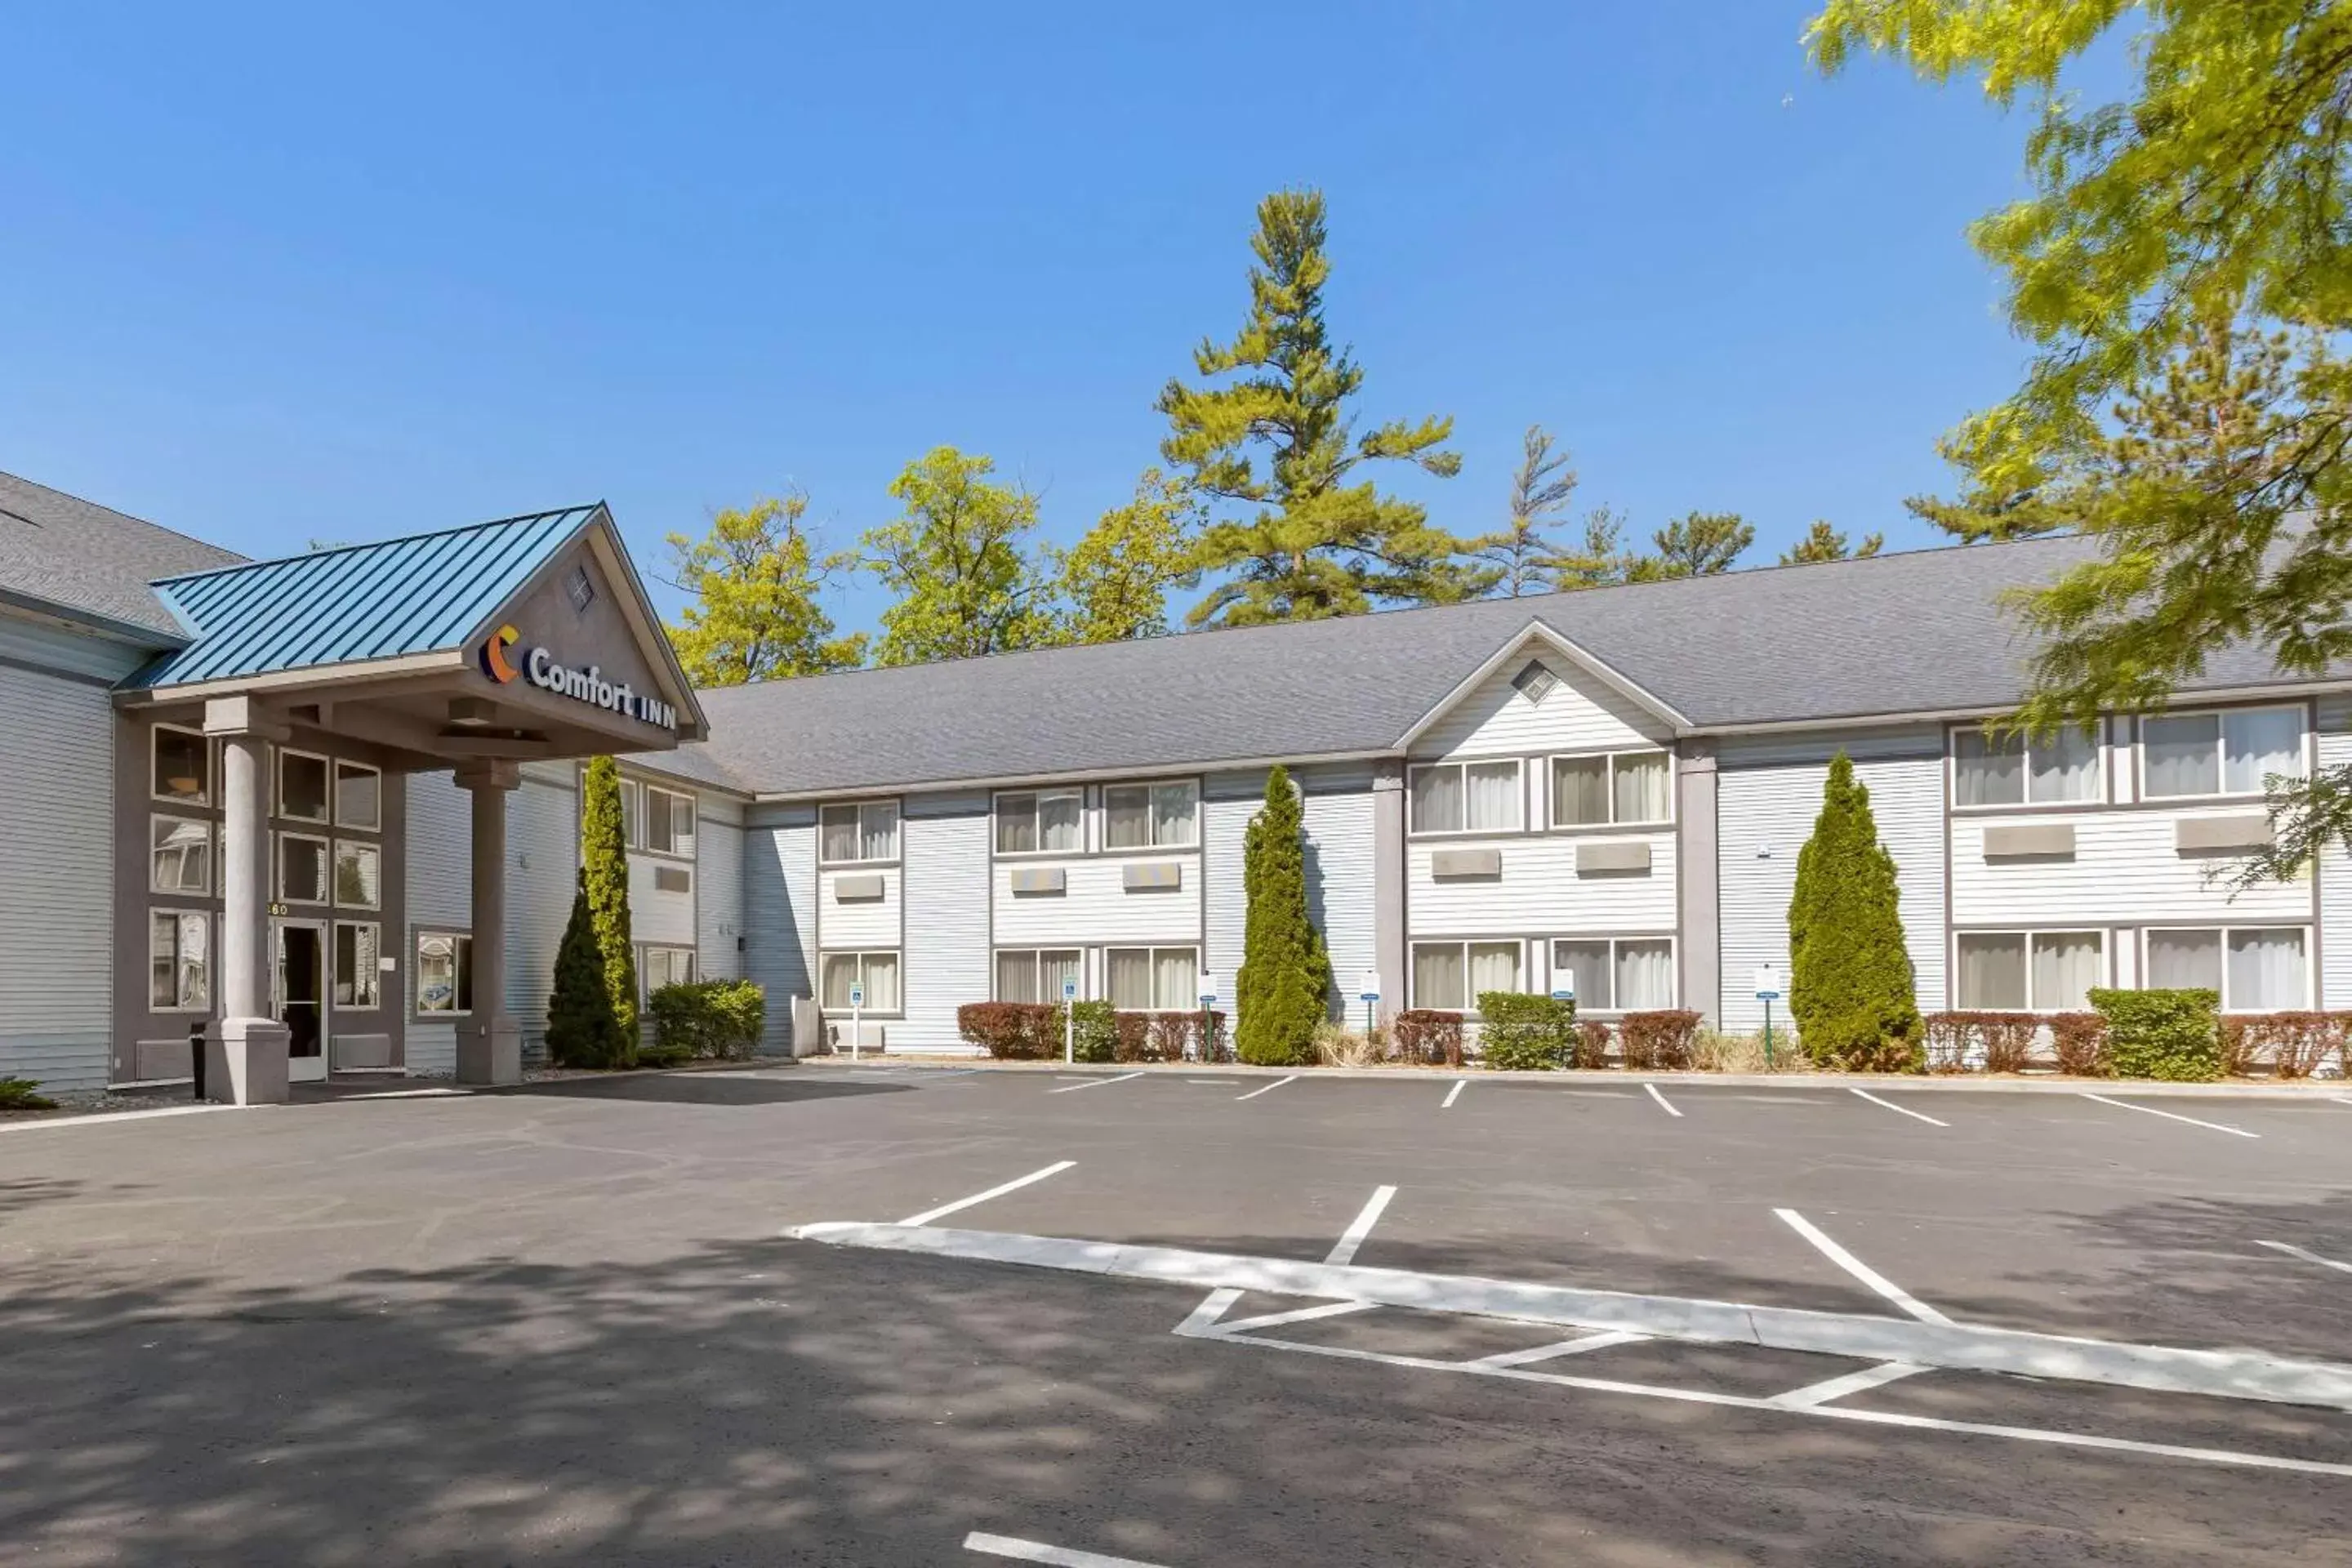 Property building in Comfort Inn Traverse City